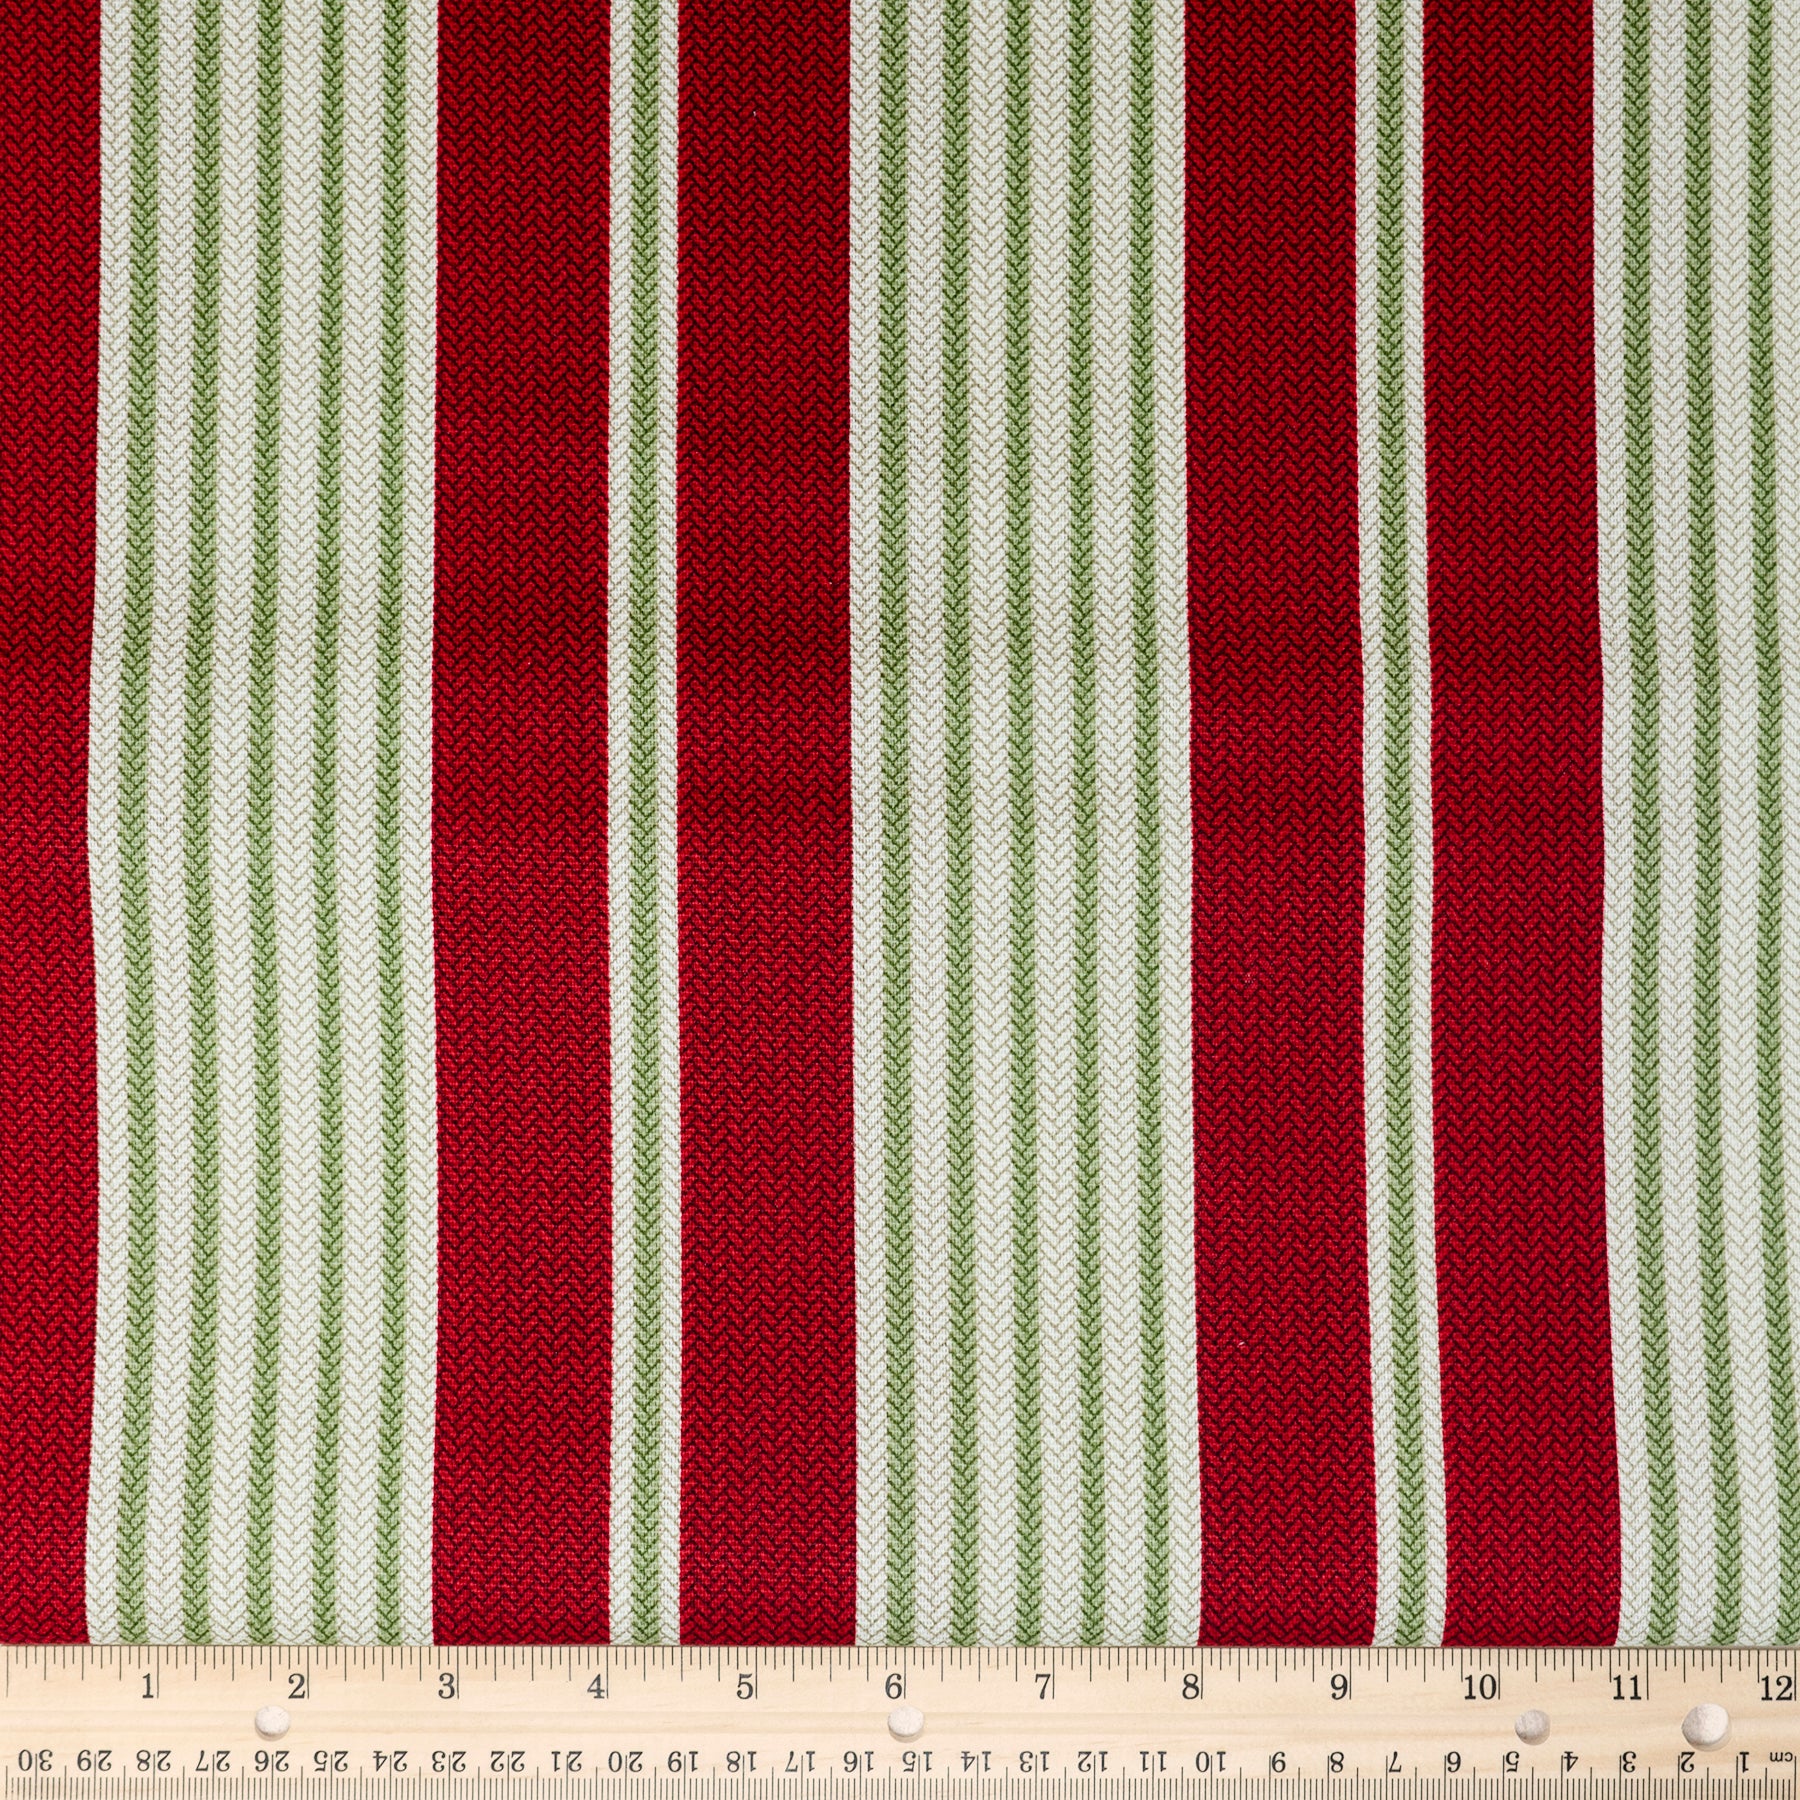 Waverly Inspirations 100% Cotton Duck 45" Texture Stripe Red Color Sewing Fabric by the Yard